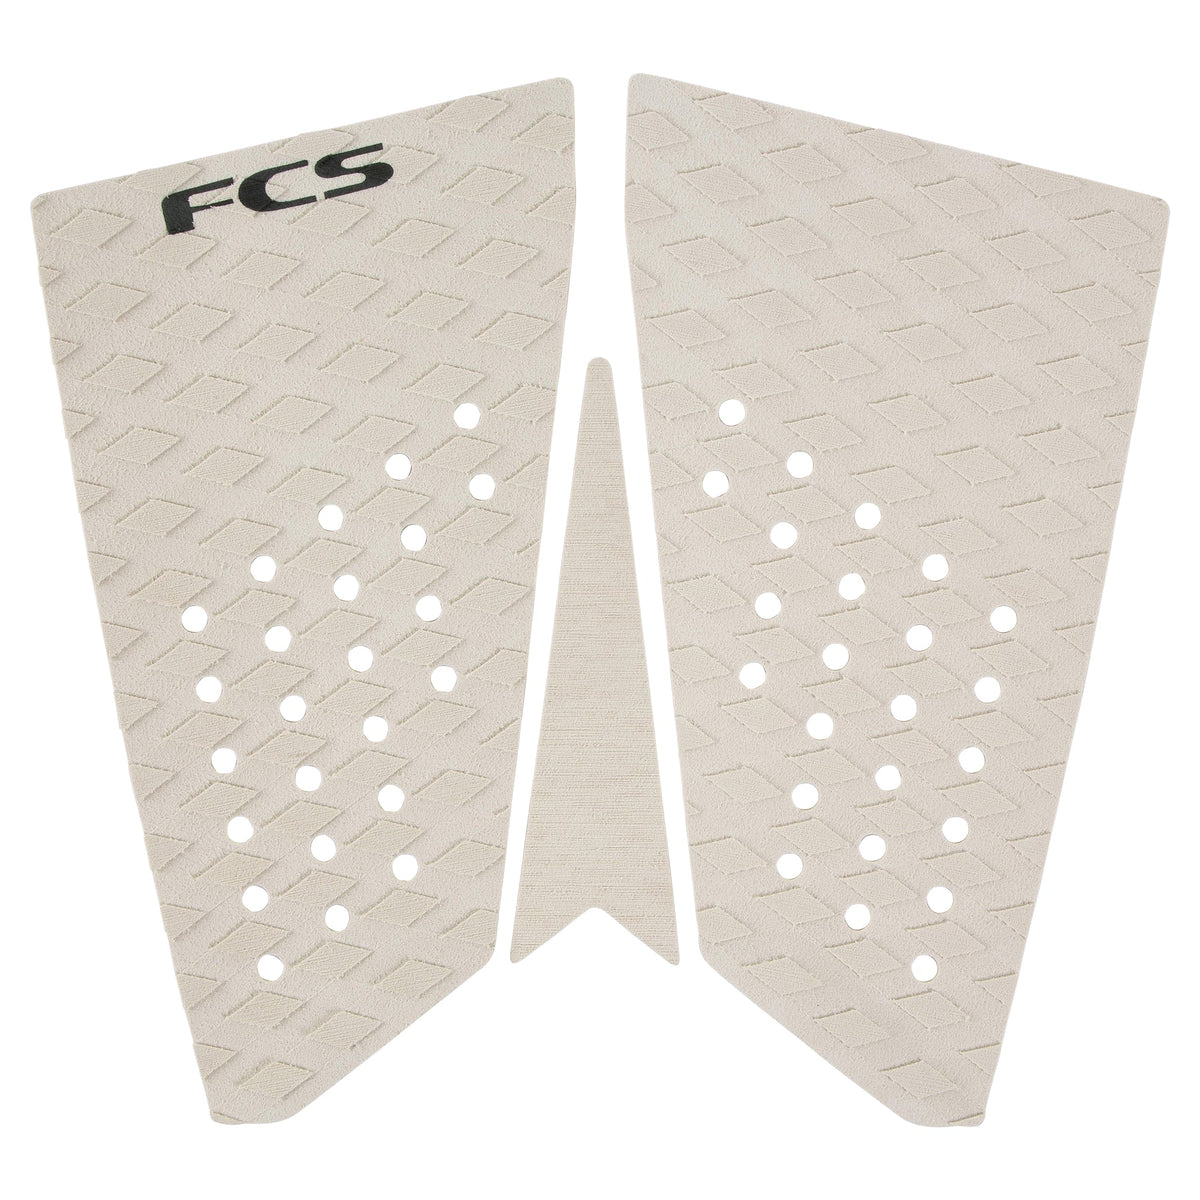 FCS T-3 TRACTION ECO SERIES - FISH